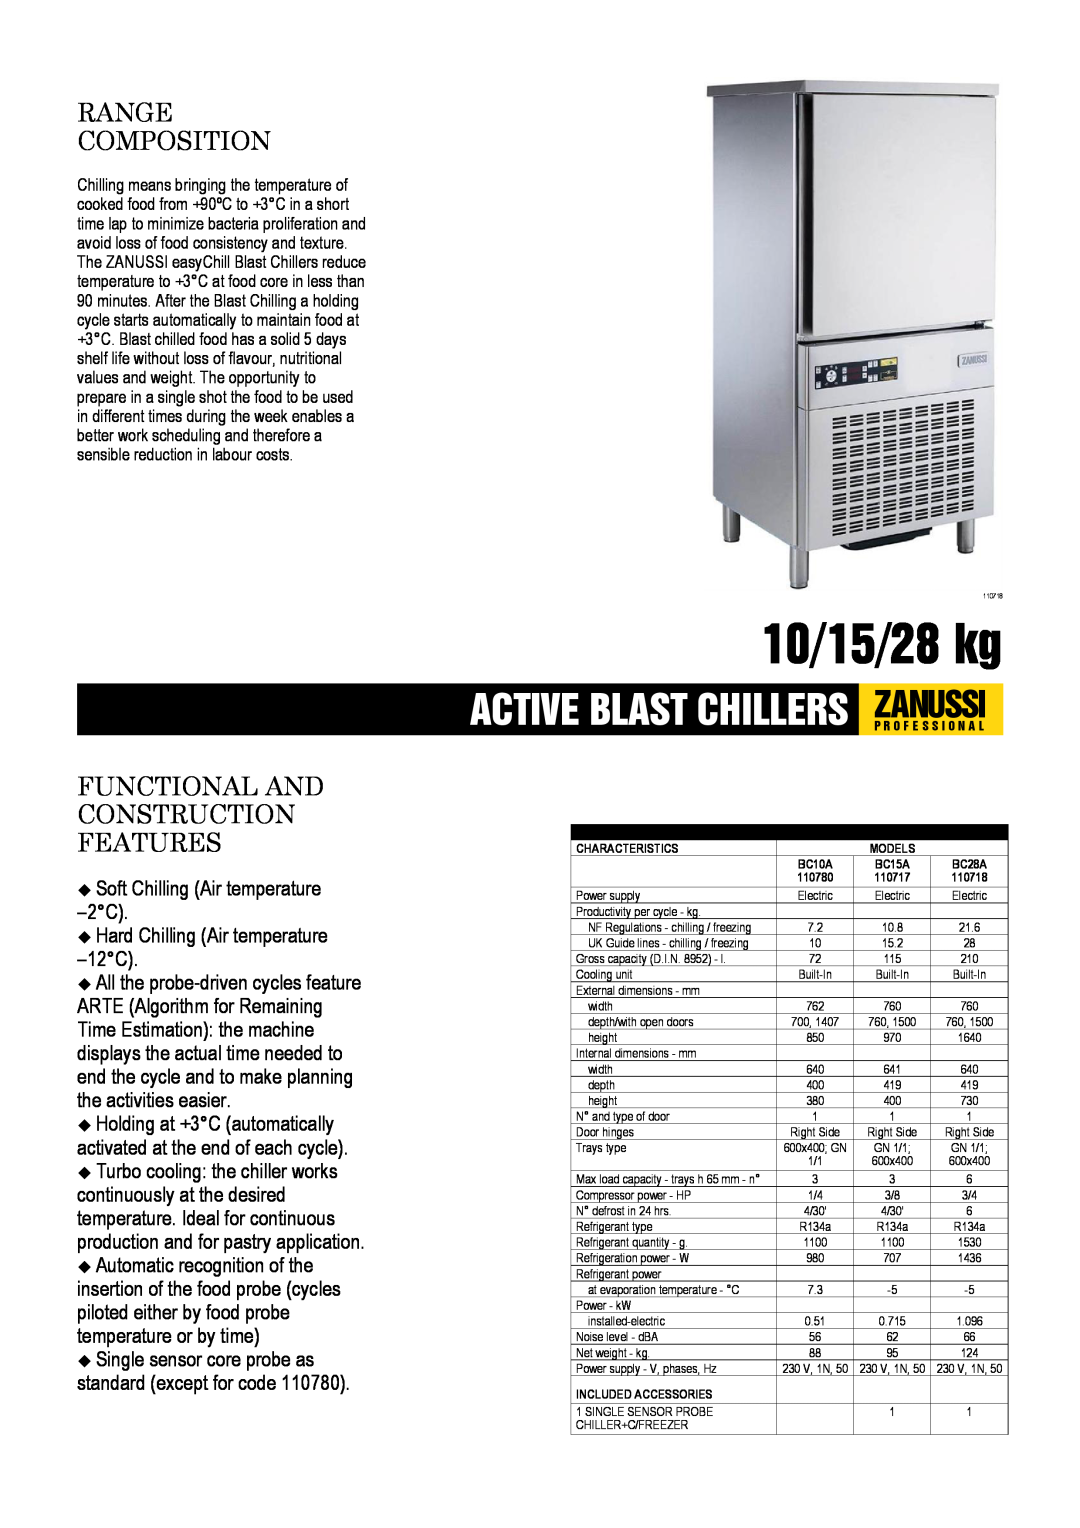 Zanussi BC15A, BC10A, BC28A, 110780, 110717 dimensions 10/15/28 kg, Range Composition, Functional And Construction Features 